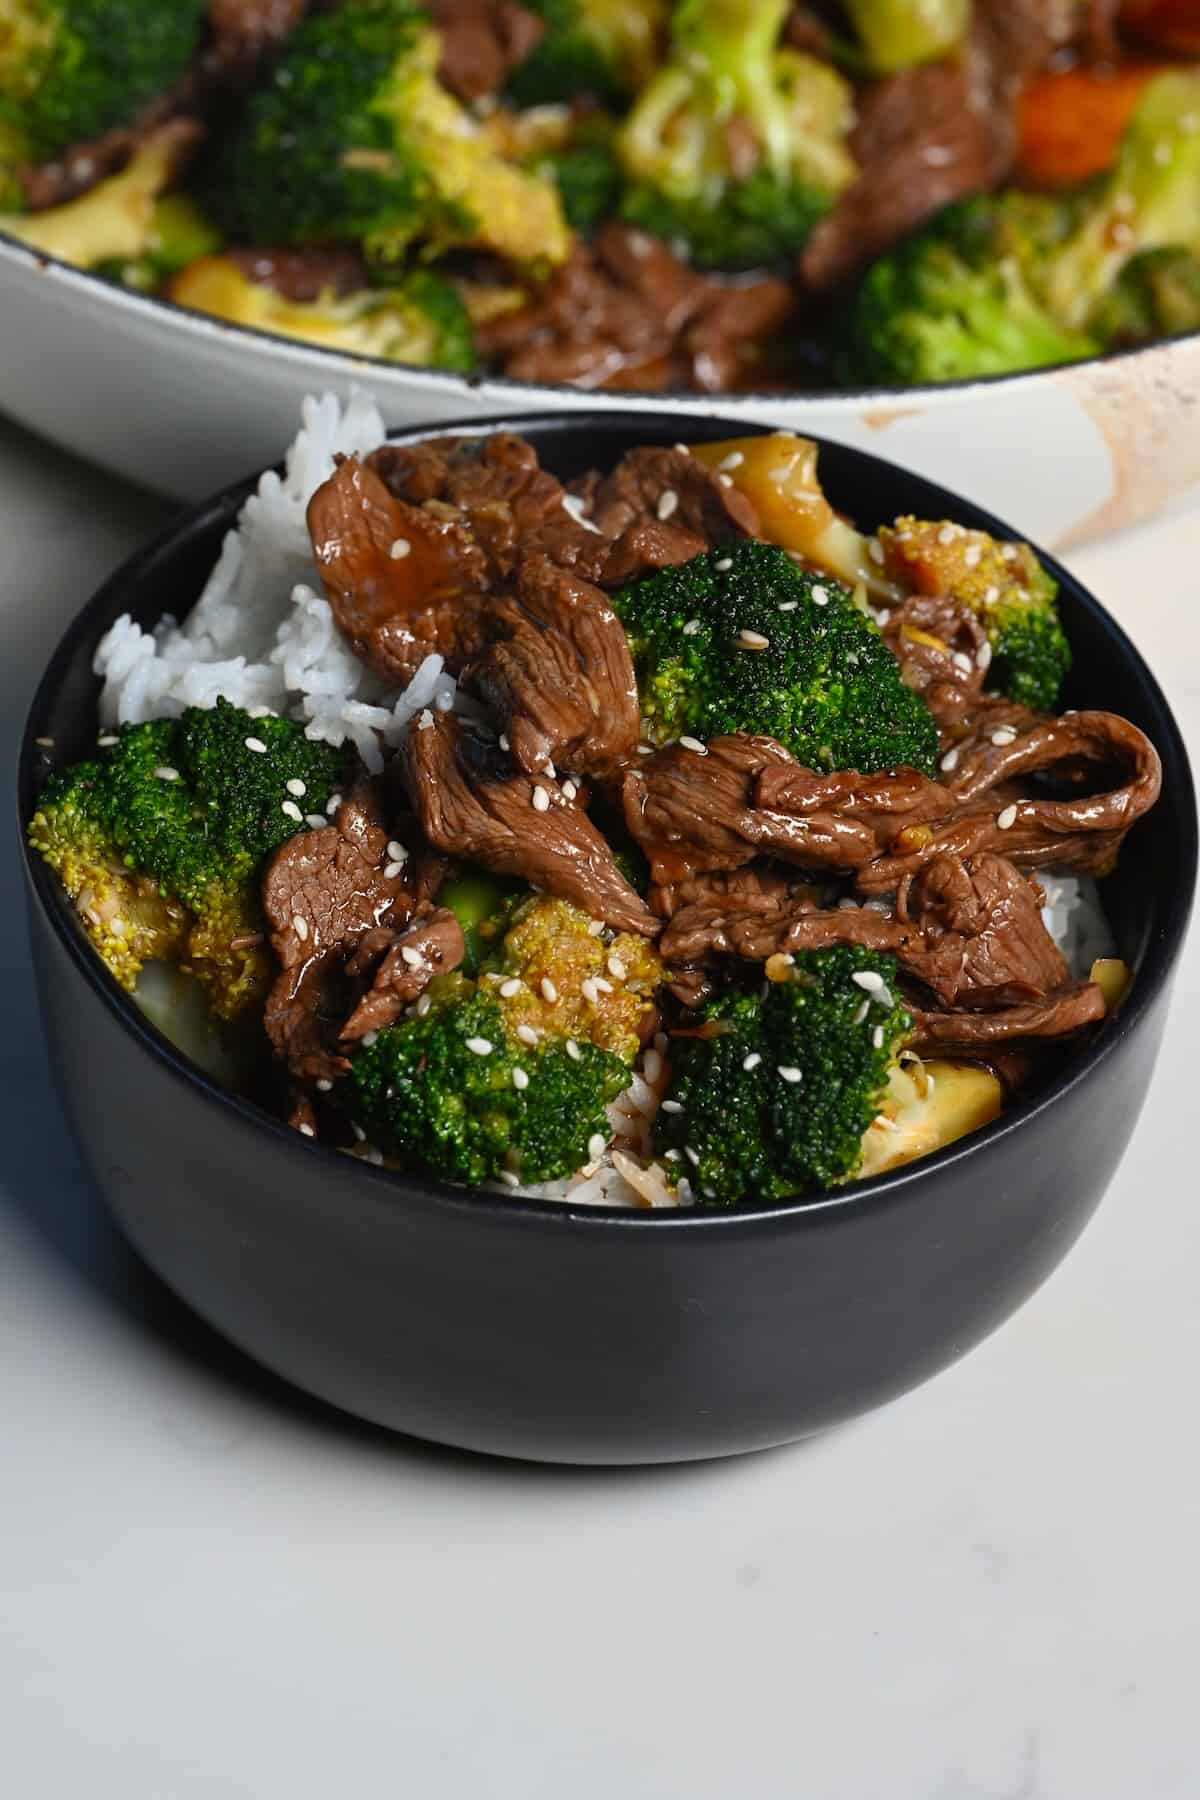 A serving of beef and broccoli